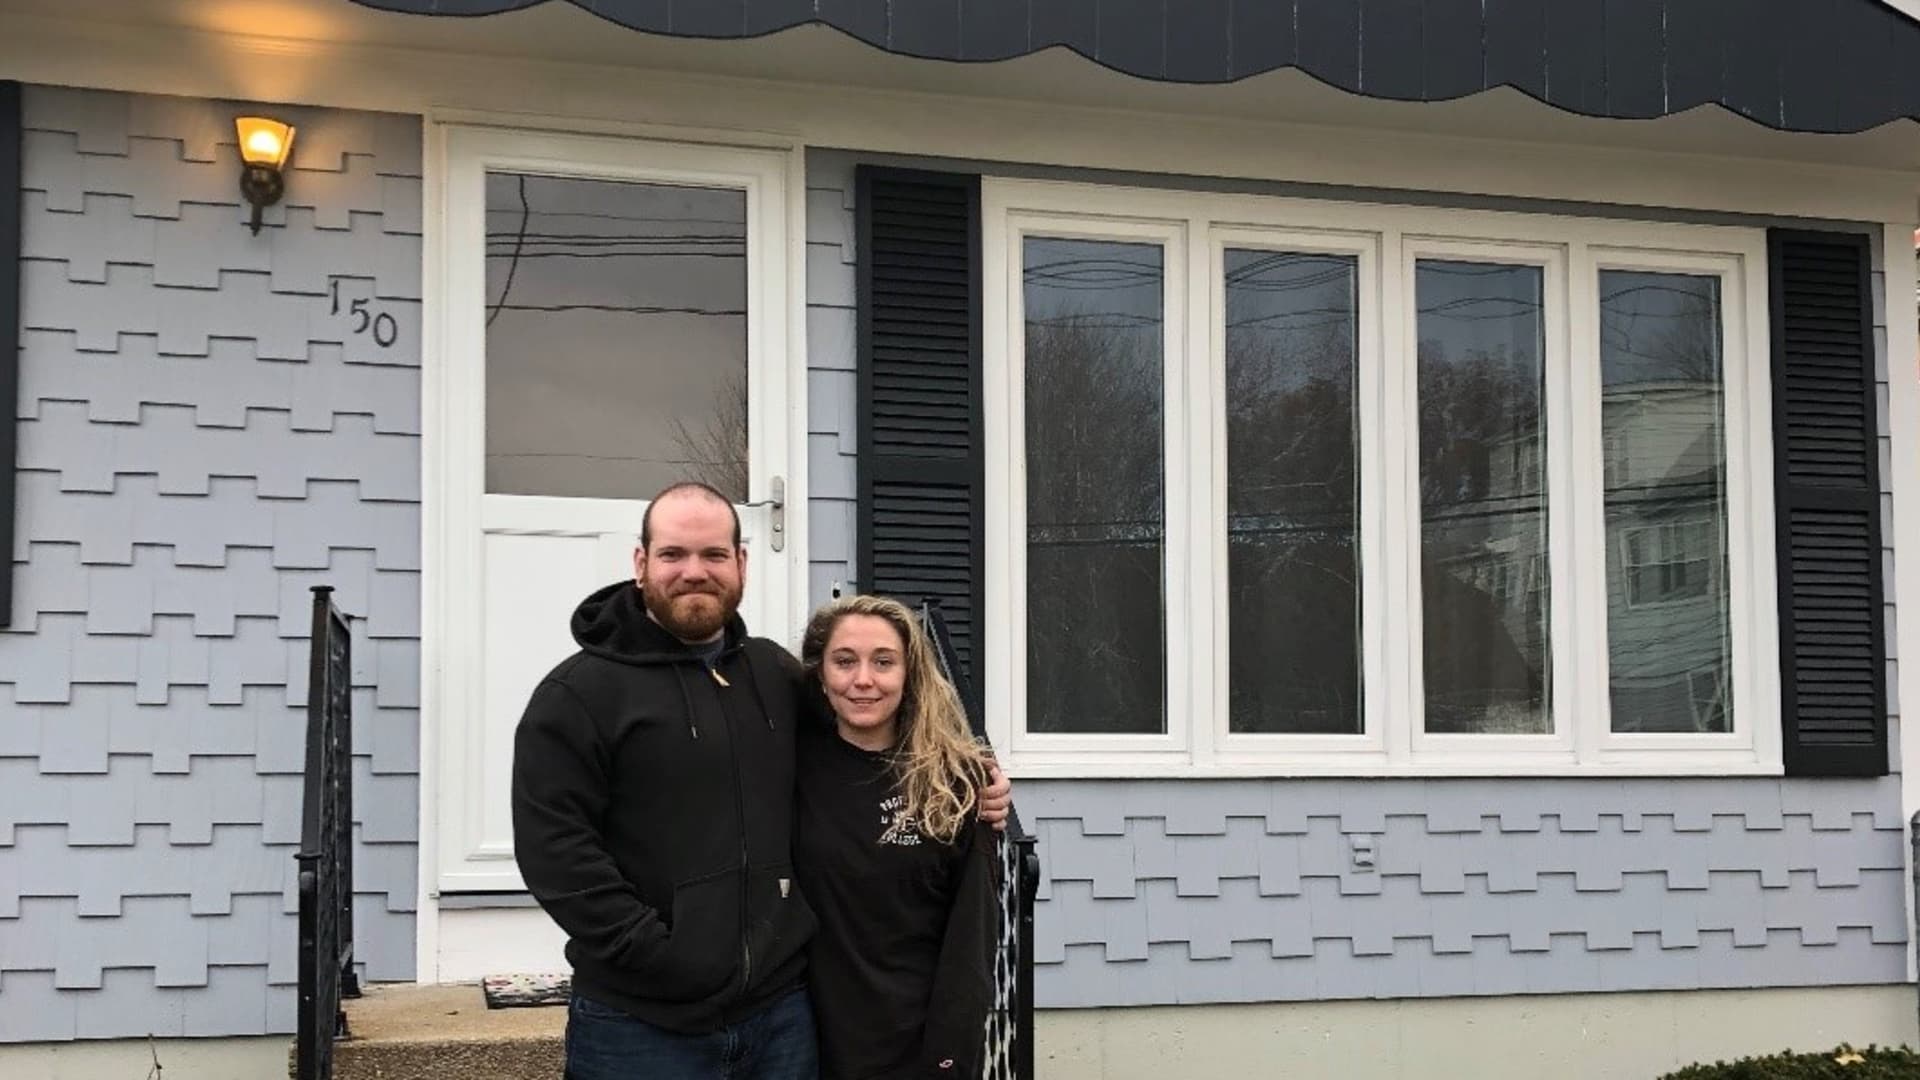 Andrew Papineau, 27, and Madi Ciampi, 27 bought their first house this year in Providence, Rhode Island, with the help of an accredited financial counselor.